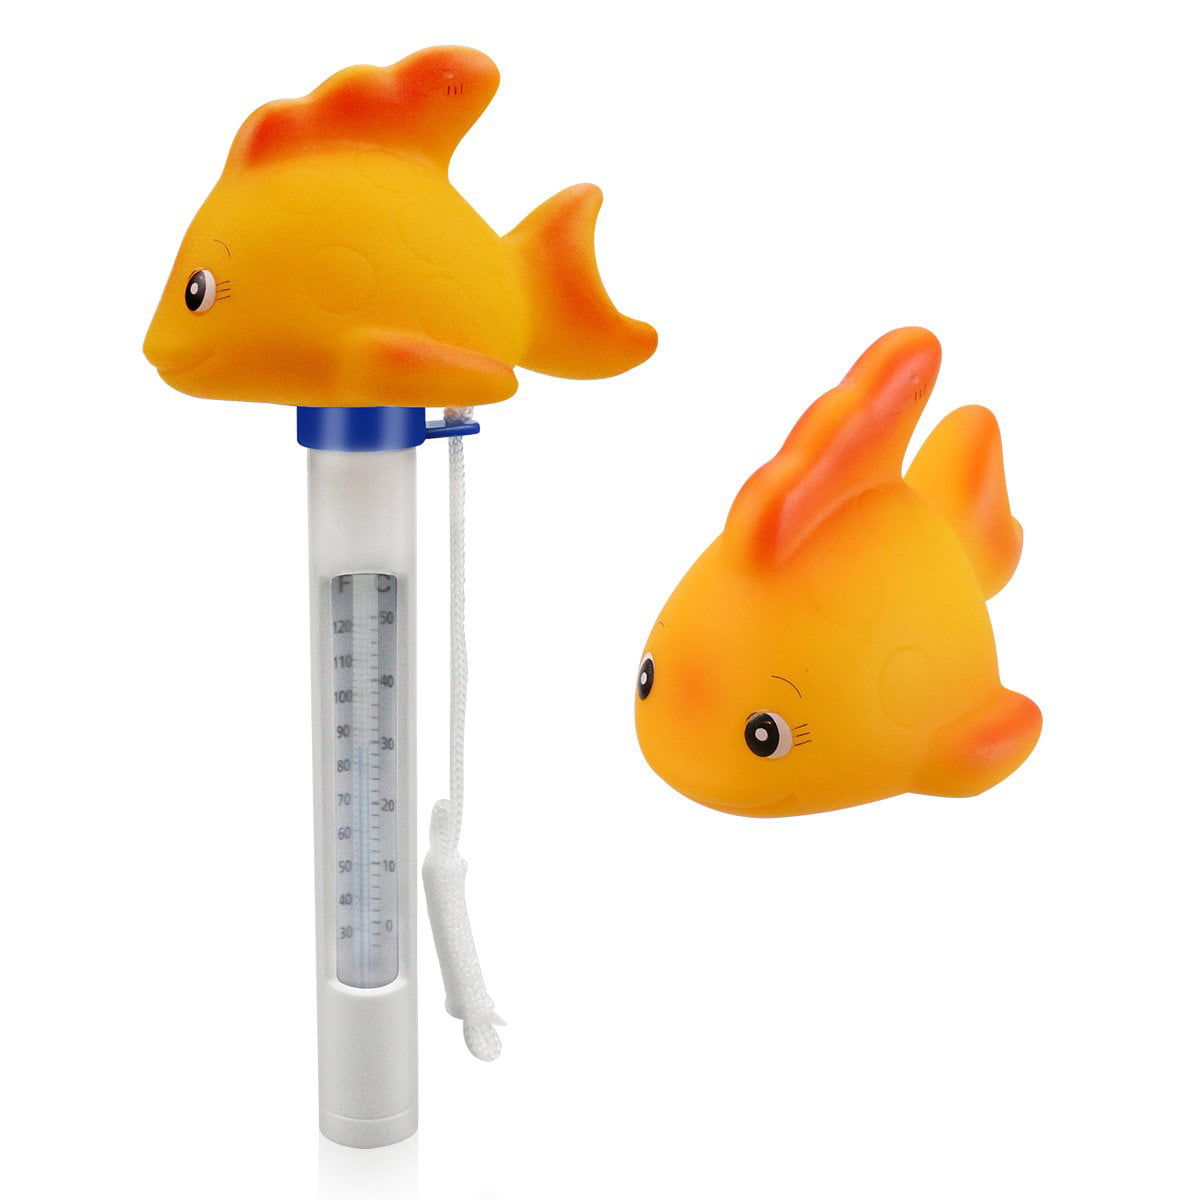 Boquite Valentines Day Carnival Swimming Pool Thermometer Large Floating Thermometer for Outdoor & Indoor Swimming Pools Spas Hot Tubs Fish Ponds ℃ & ℉ Shatter Resistant